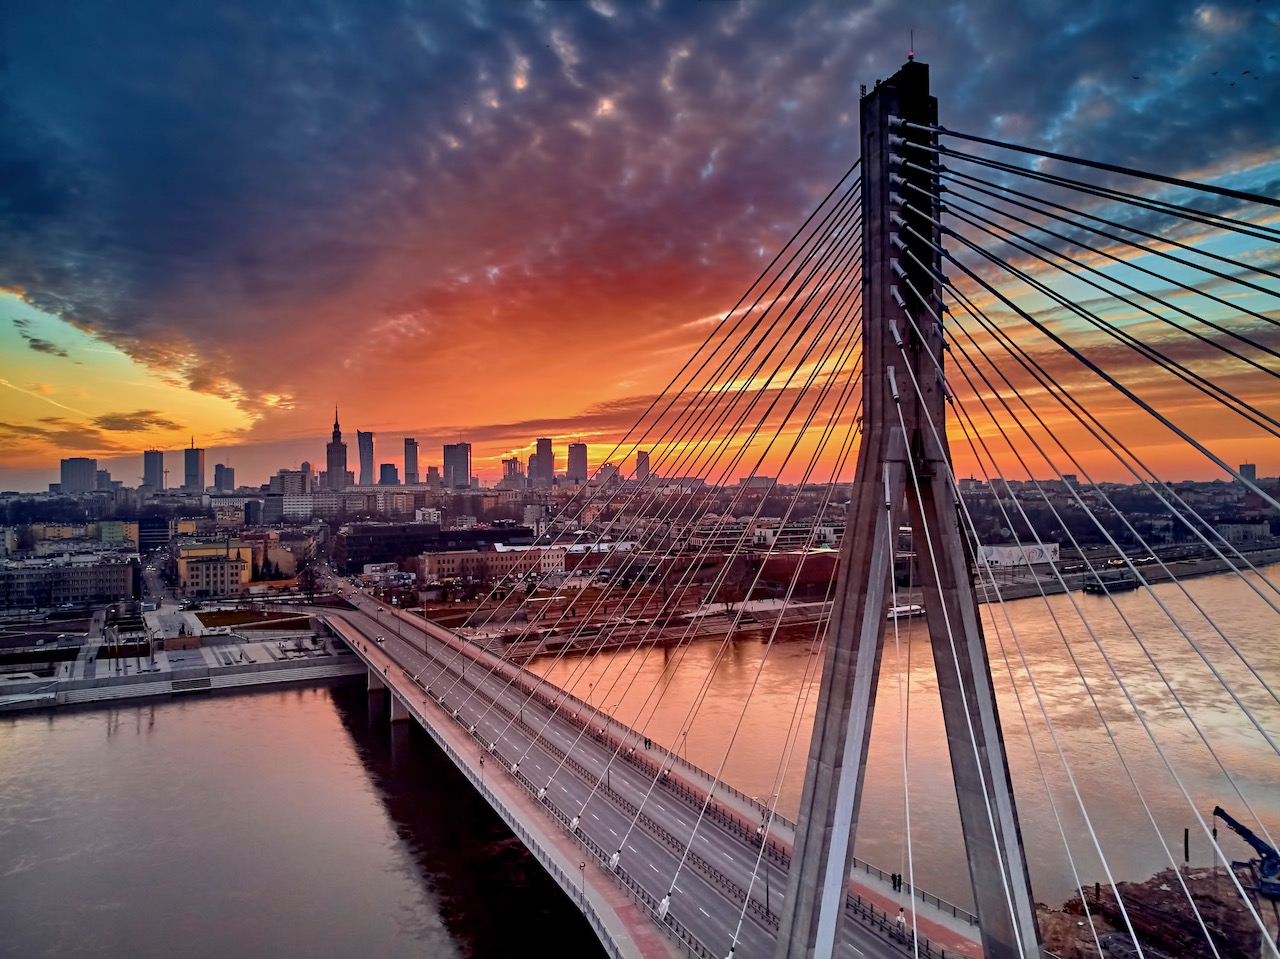 beautiful-panoramic-aerial-drone-sunset-view-to-warsaw-city-center-with-skyscrapers-and-swietokrzyski-bridge--en--holy-cross-bridge----is-a-cable-stayed-bridge-over-the-vistula-river-in-warsaw--poland